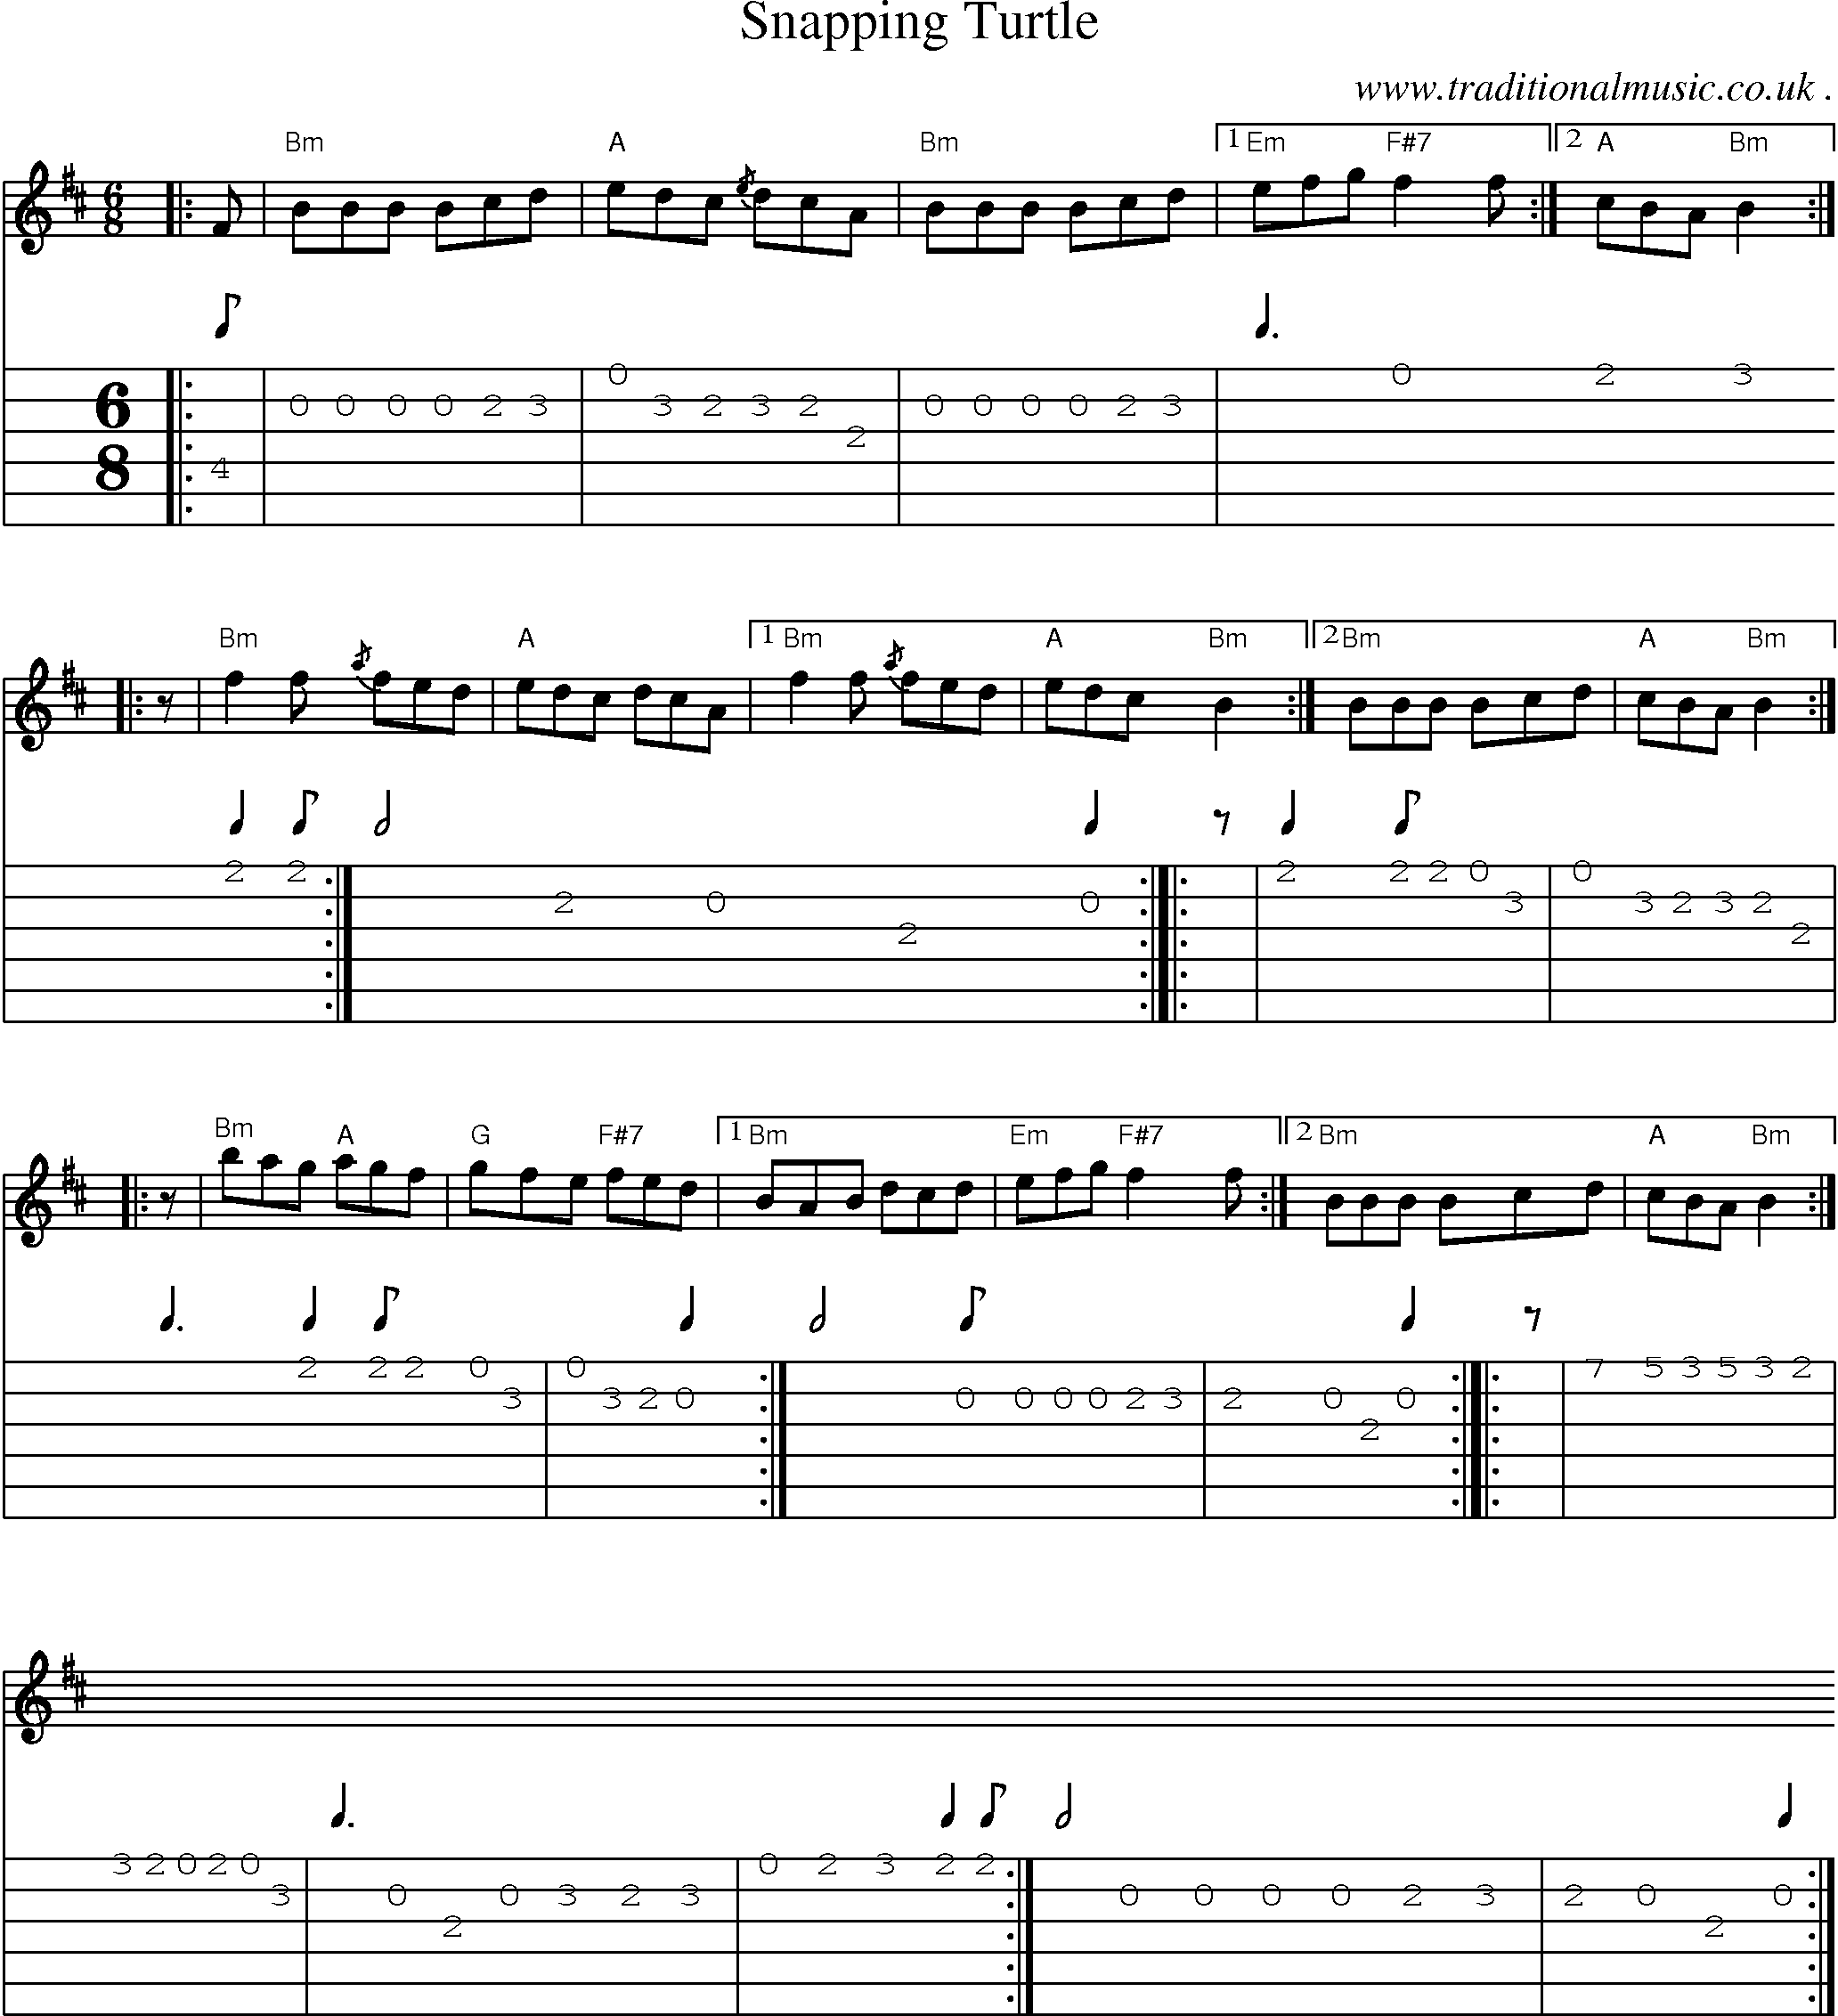 Sheet-music  score, Chords and Guitar Tabs for Snapping Turtle